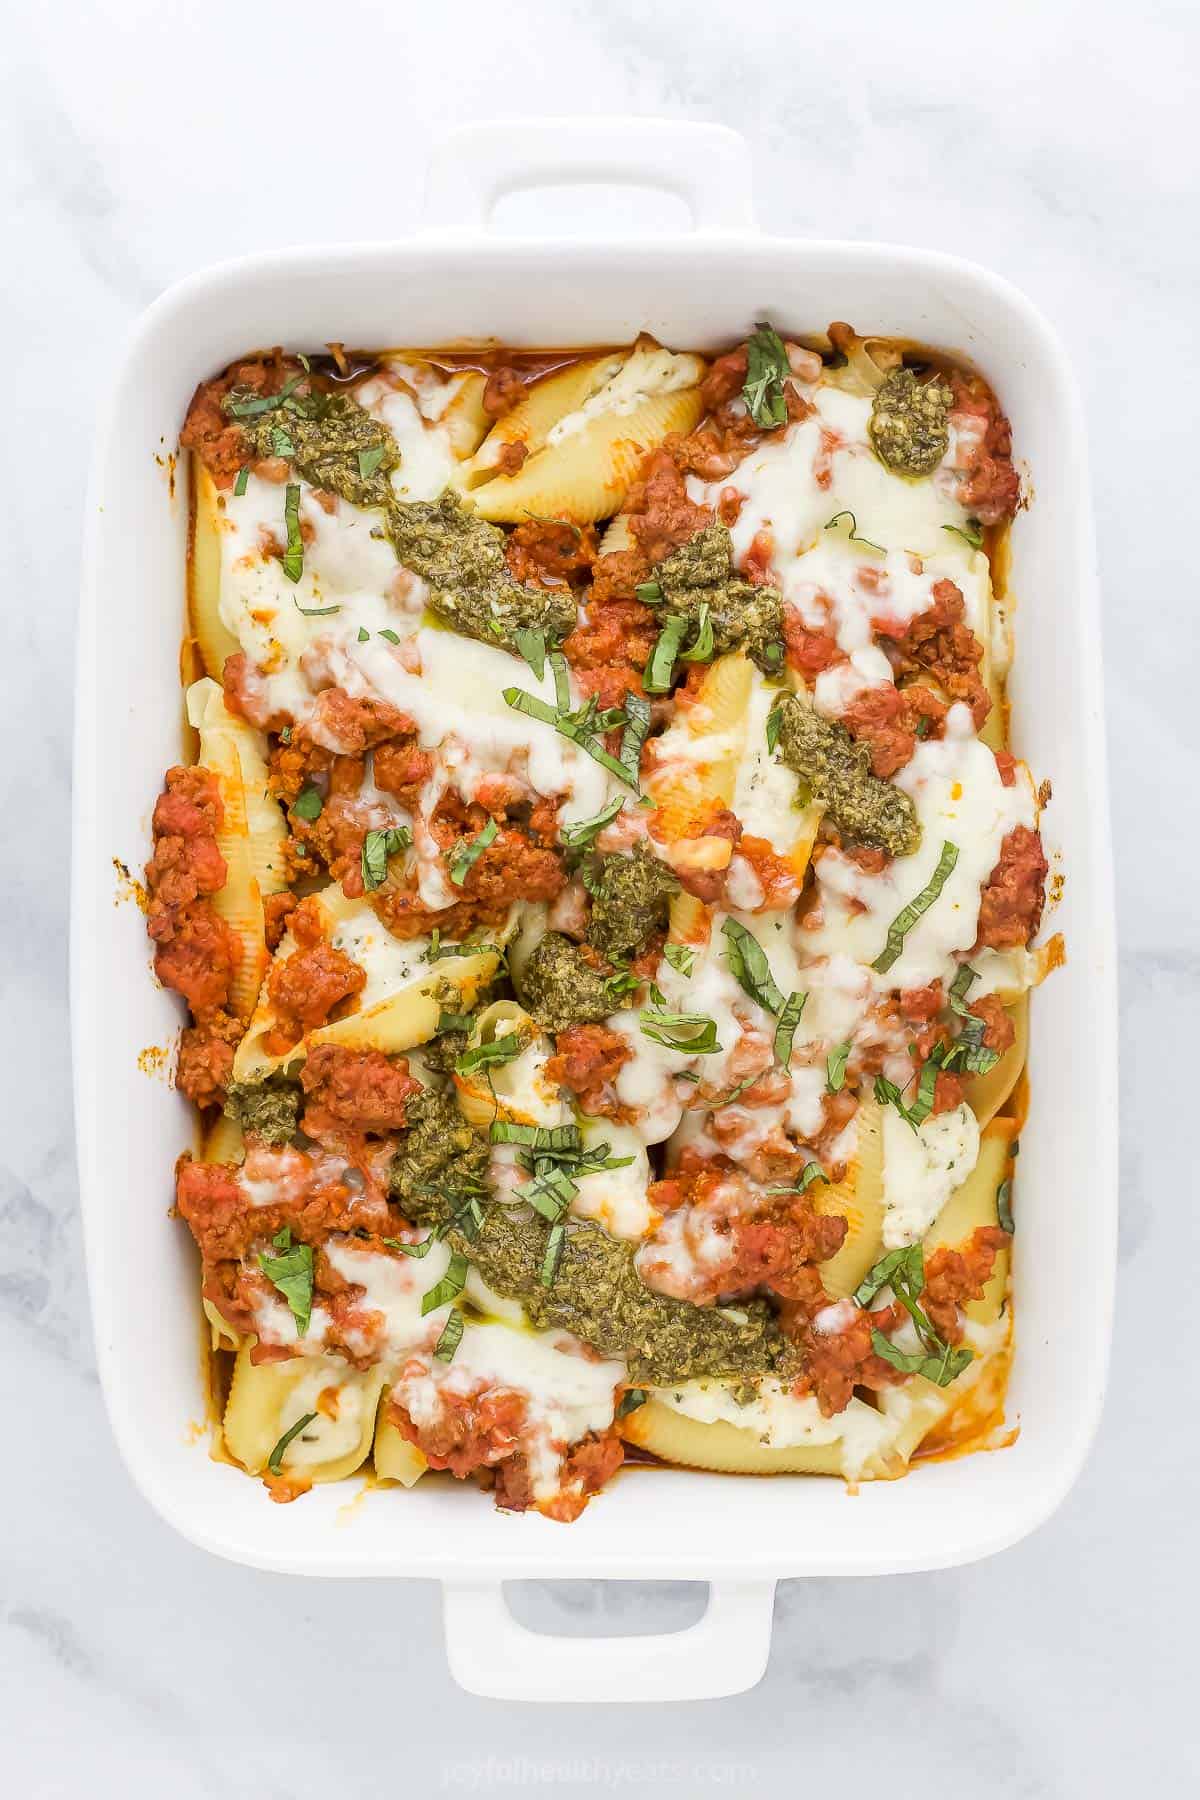 Baked stuffed shells with meat inside of a casserole dish with pesto sauce and mozzarella cheese on top